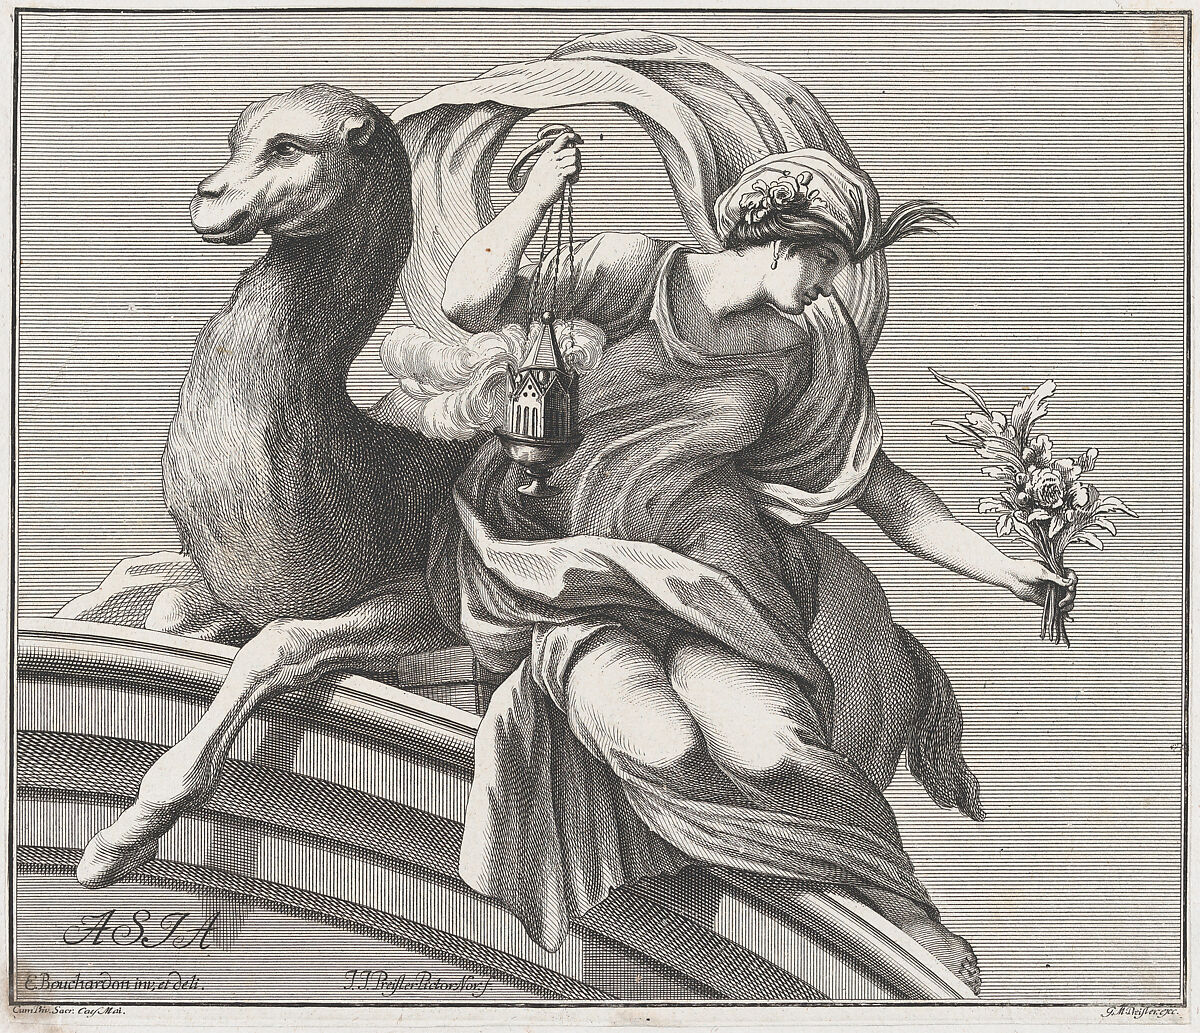 Allegory of Asia, from the Four Continents, Johann Justin Preissler, Engraving